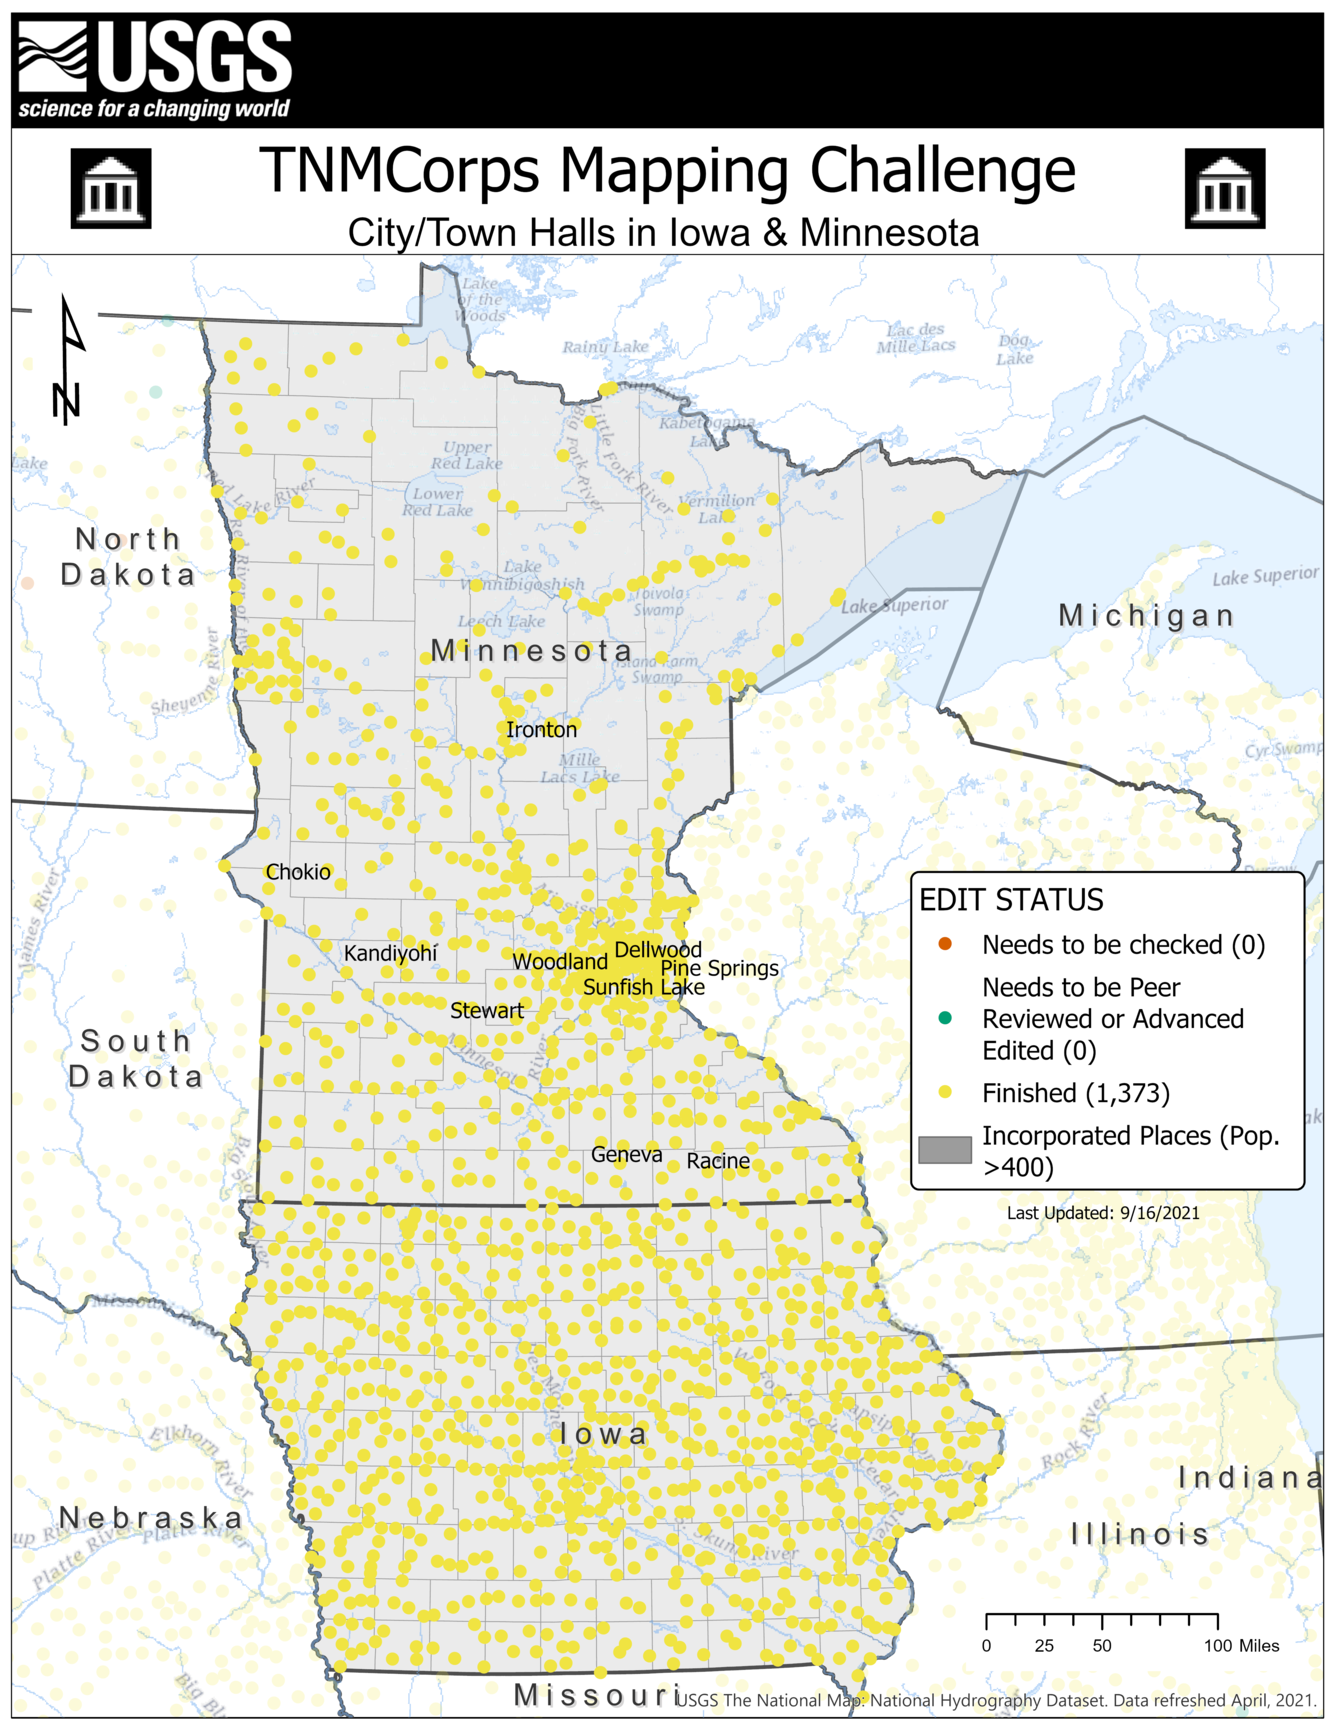 TNMCorps Mapping Challenge: City/Town Halls in IA, MN wIncPl